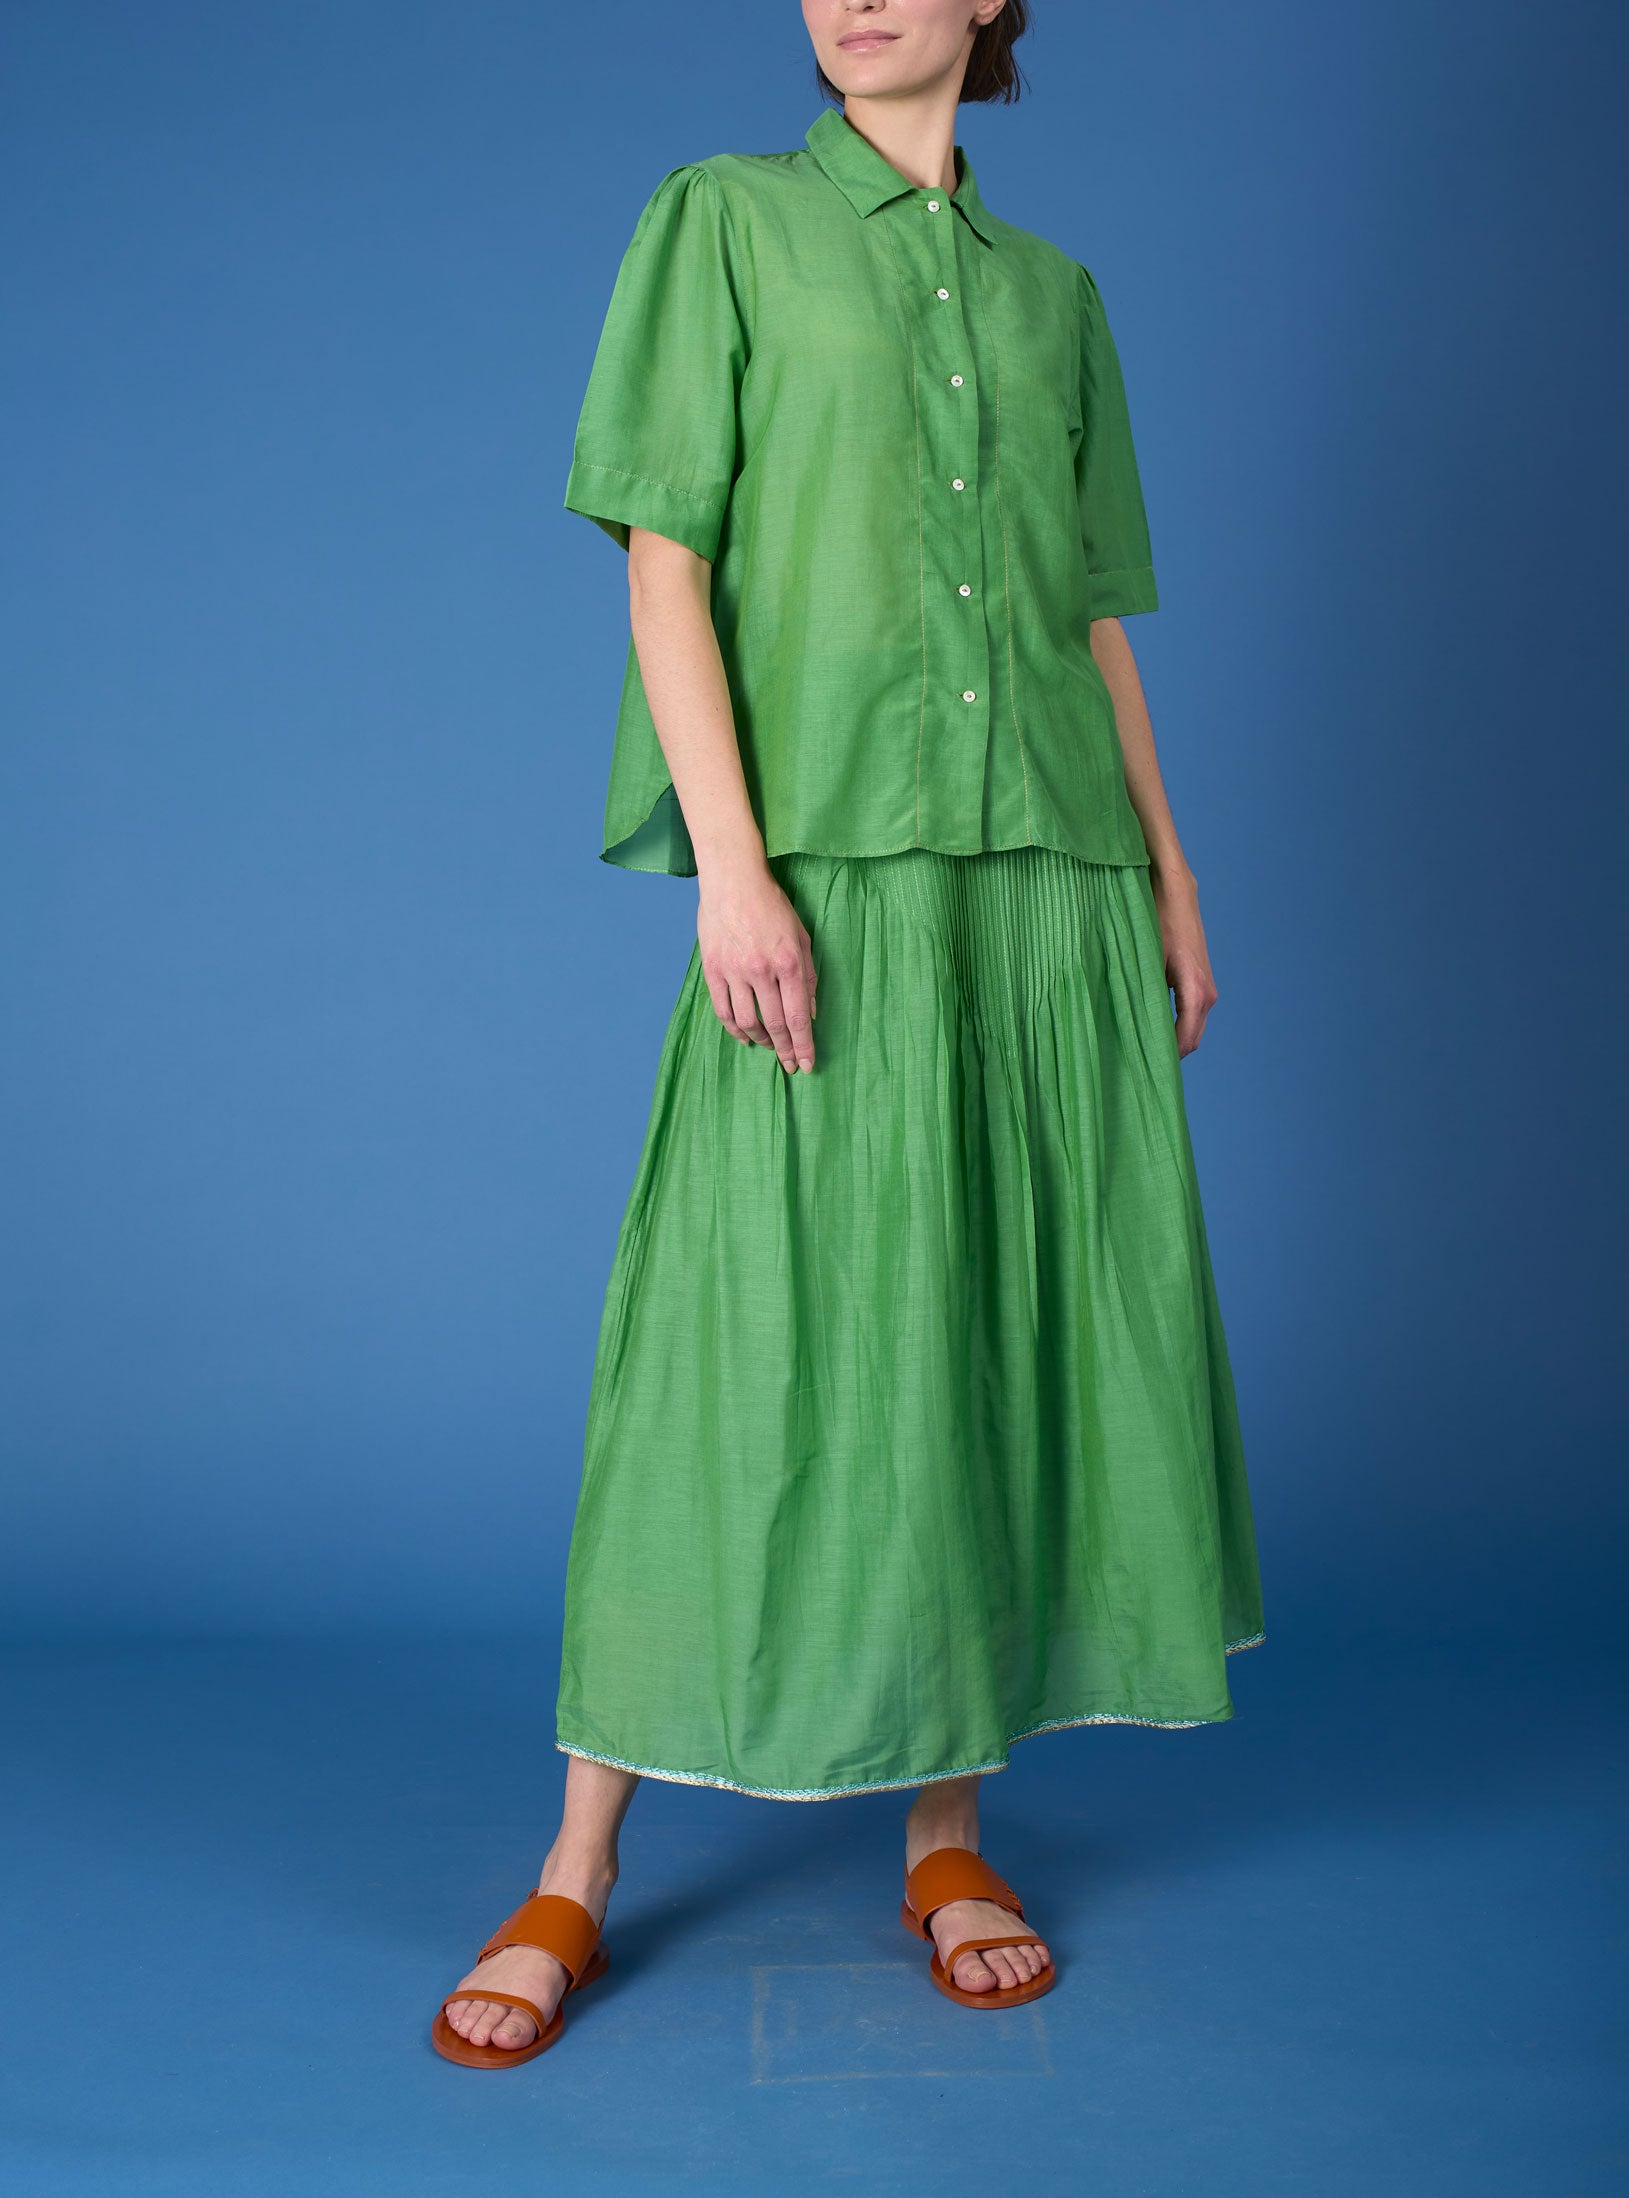 Large view of Betty Gipsy Embroidery Veridian Green Shirt with Verde skirt by Thierry Colson 